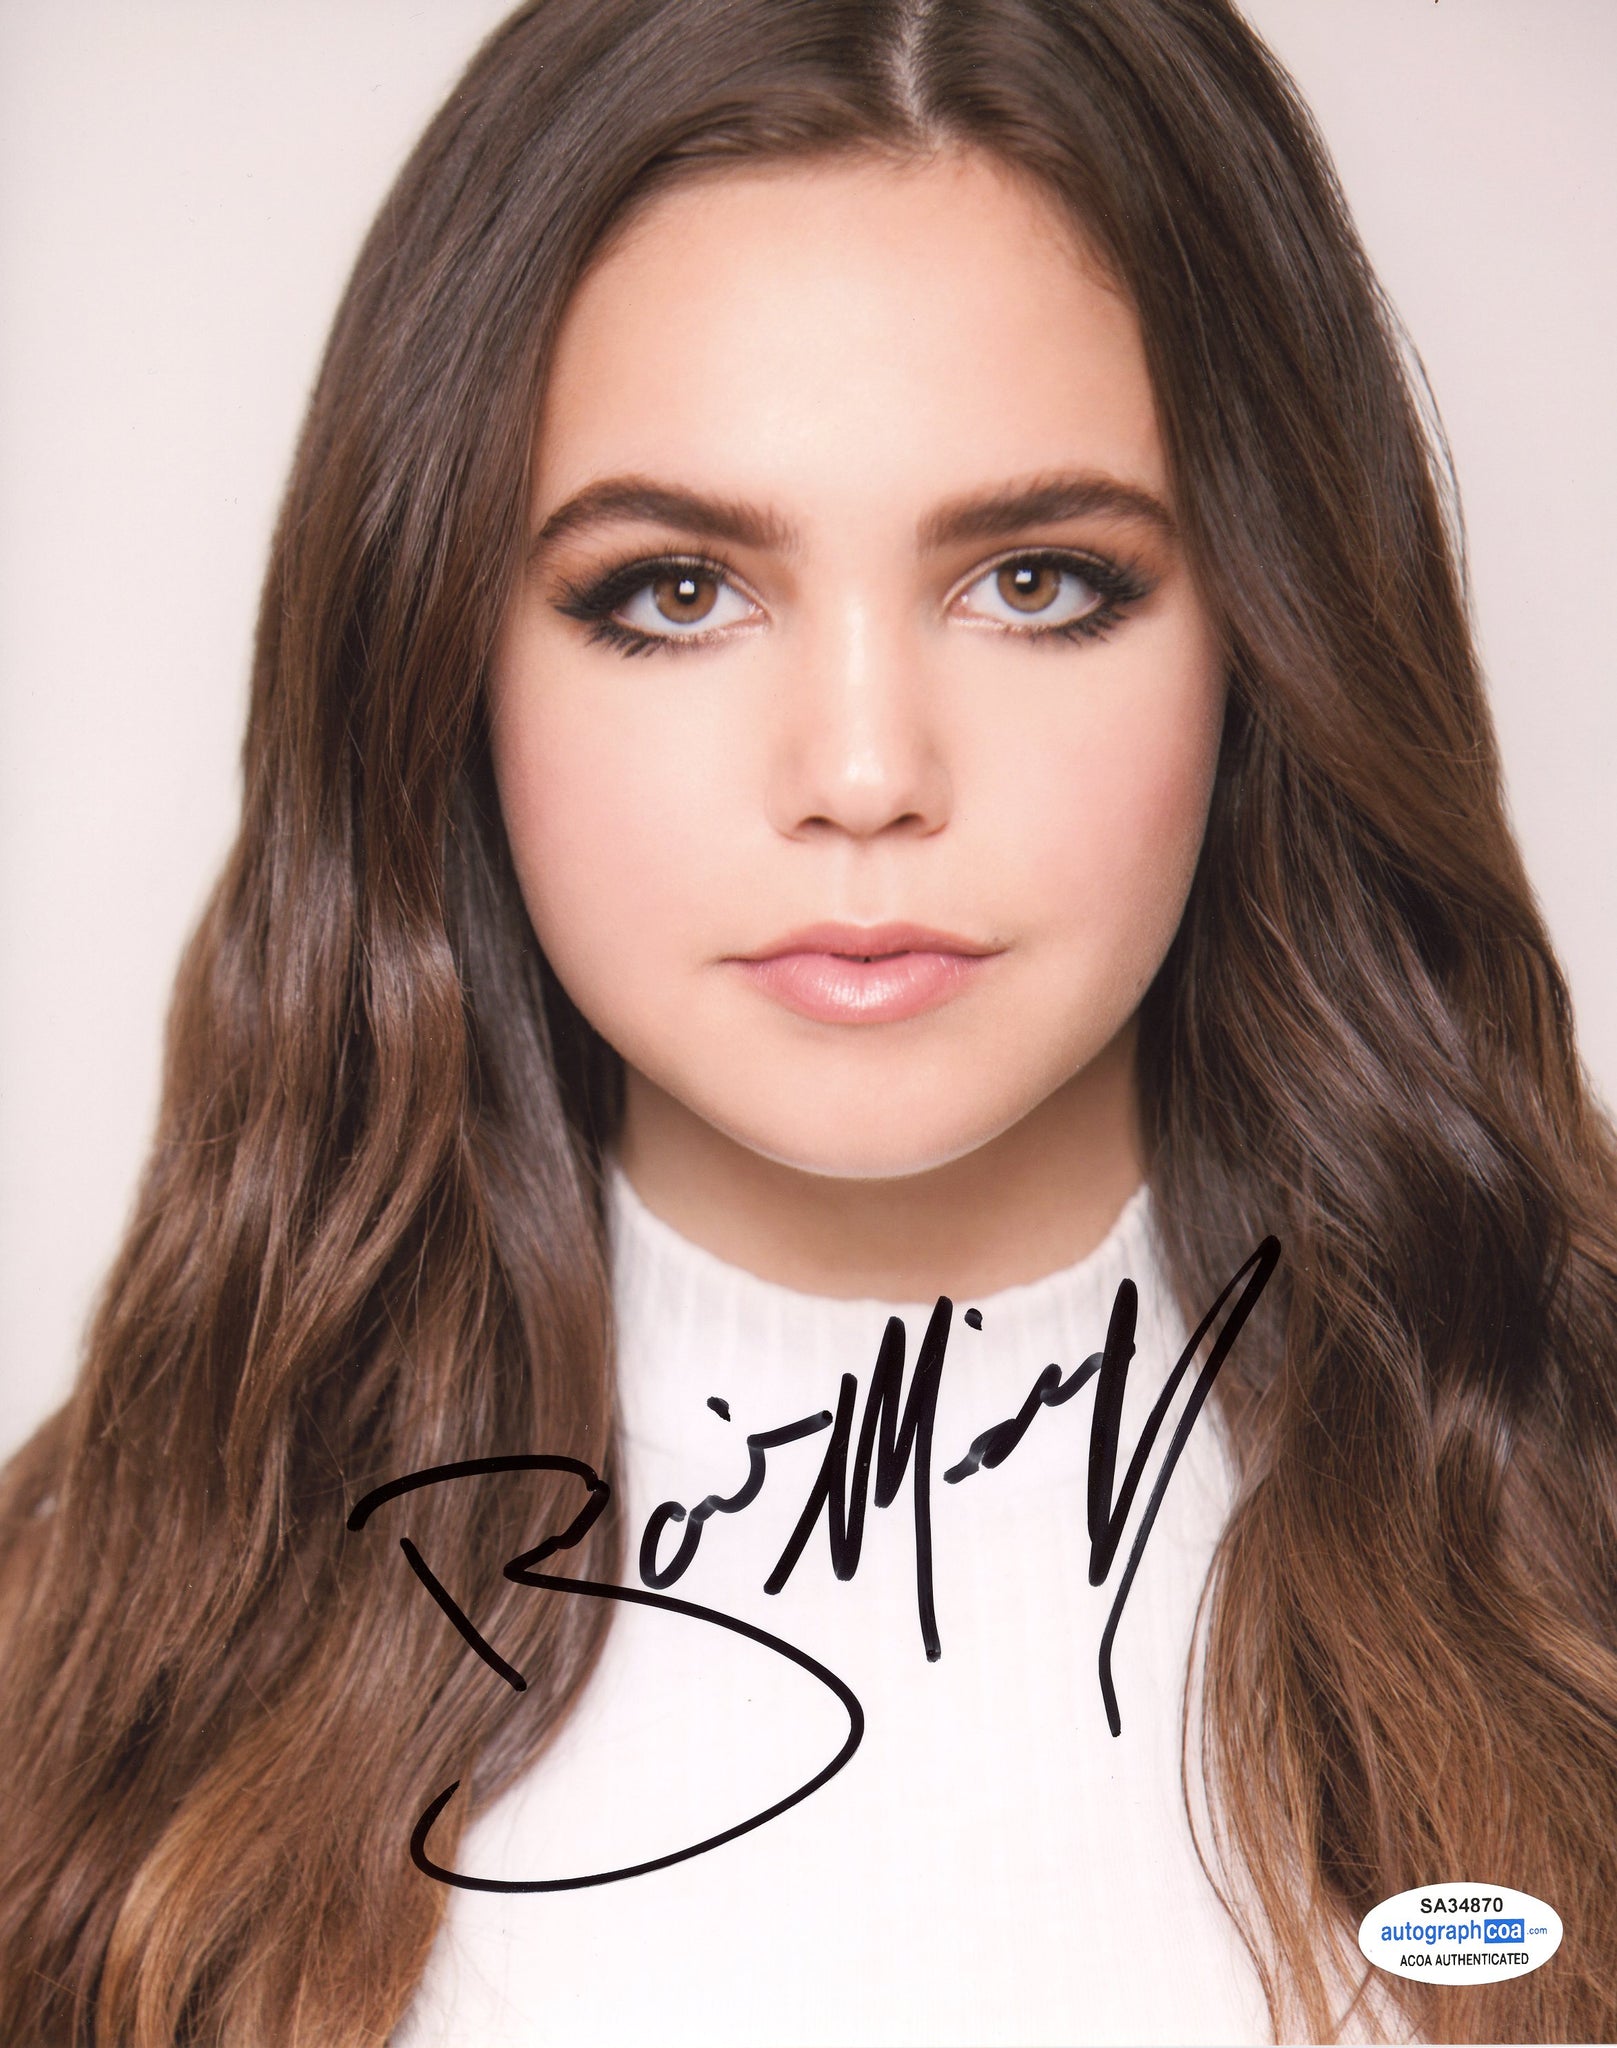 Bailee Madison Sexy Signed Autograph 8x10 Photo ACOA #55 - Outlaw Hobbies Authentic Autographs